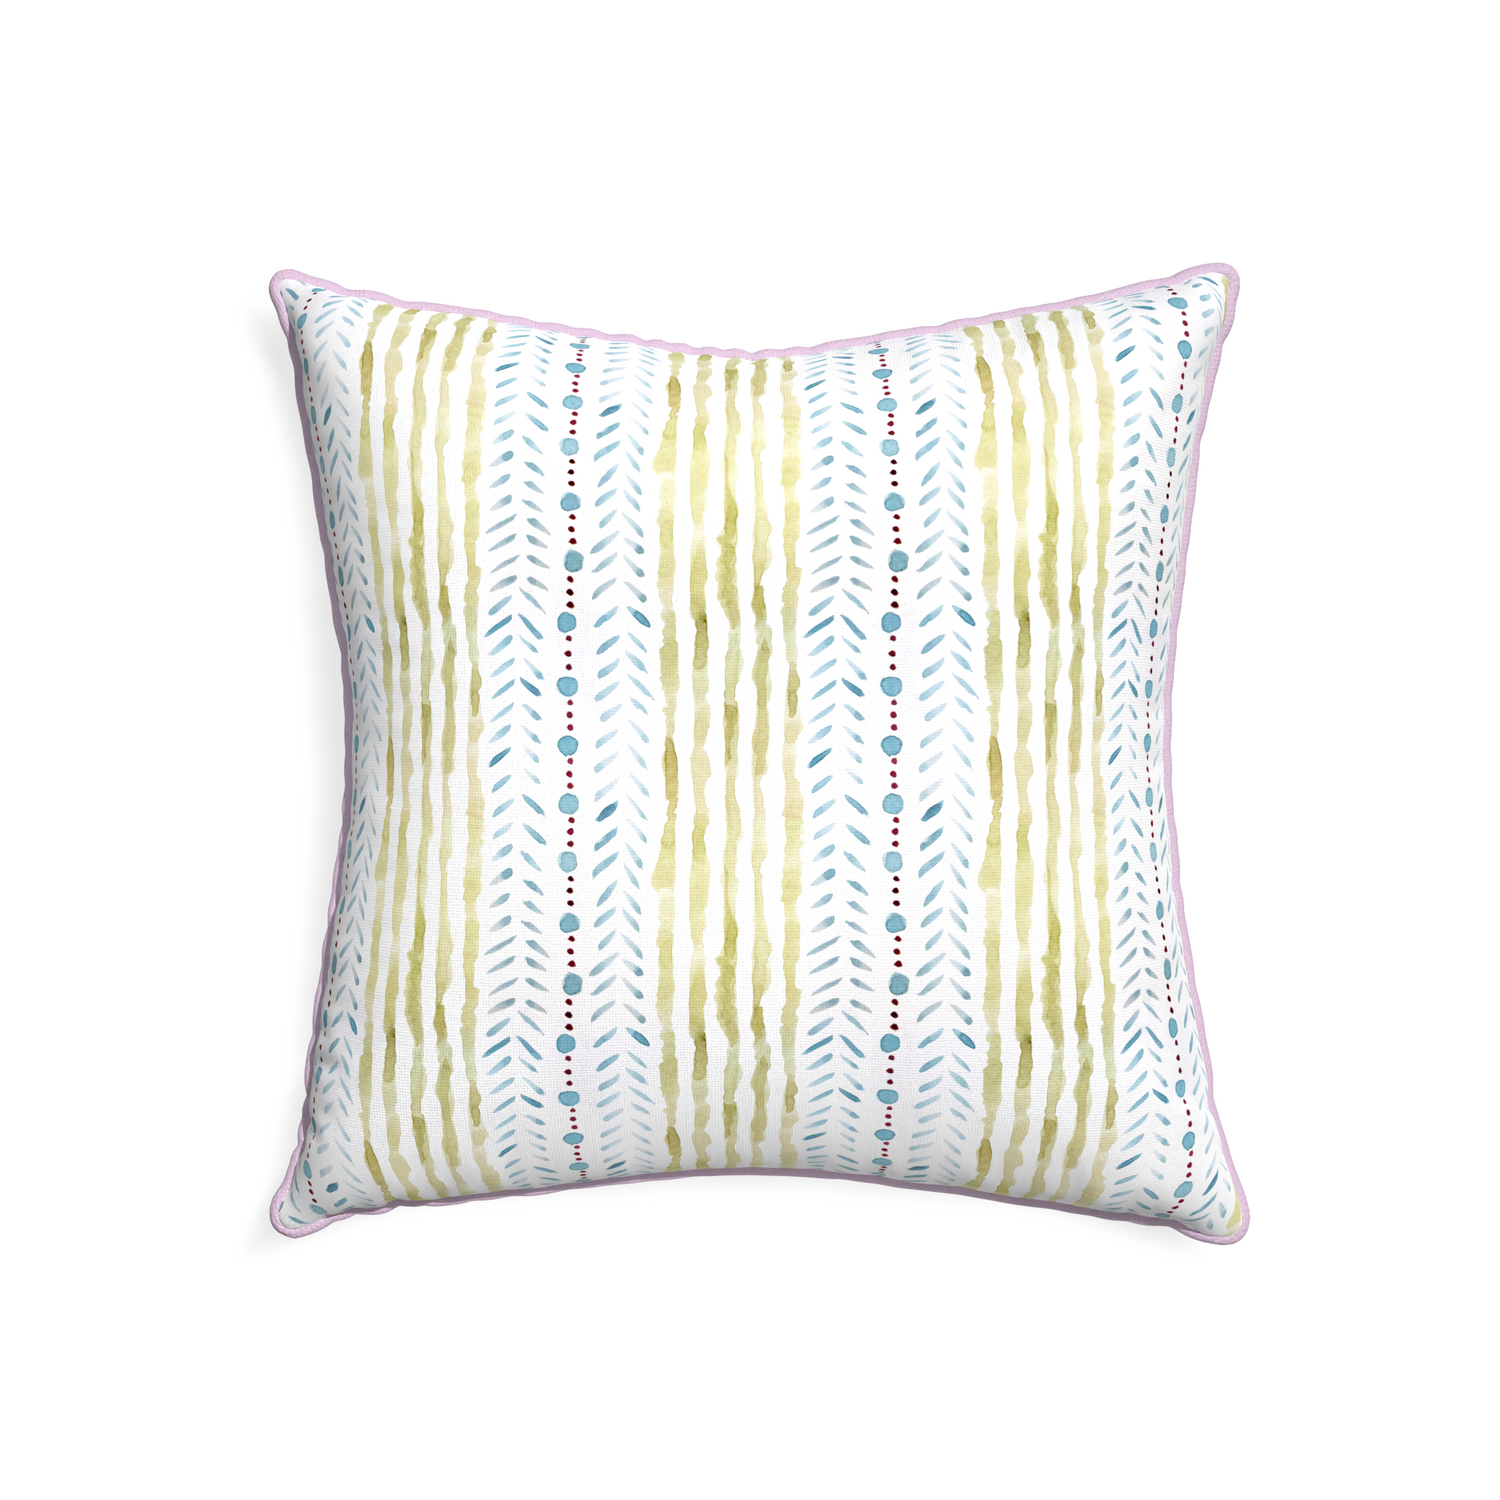 22-square julia custom blue & green stripedpillow with l piping on white background